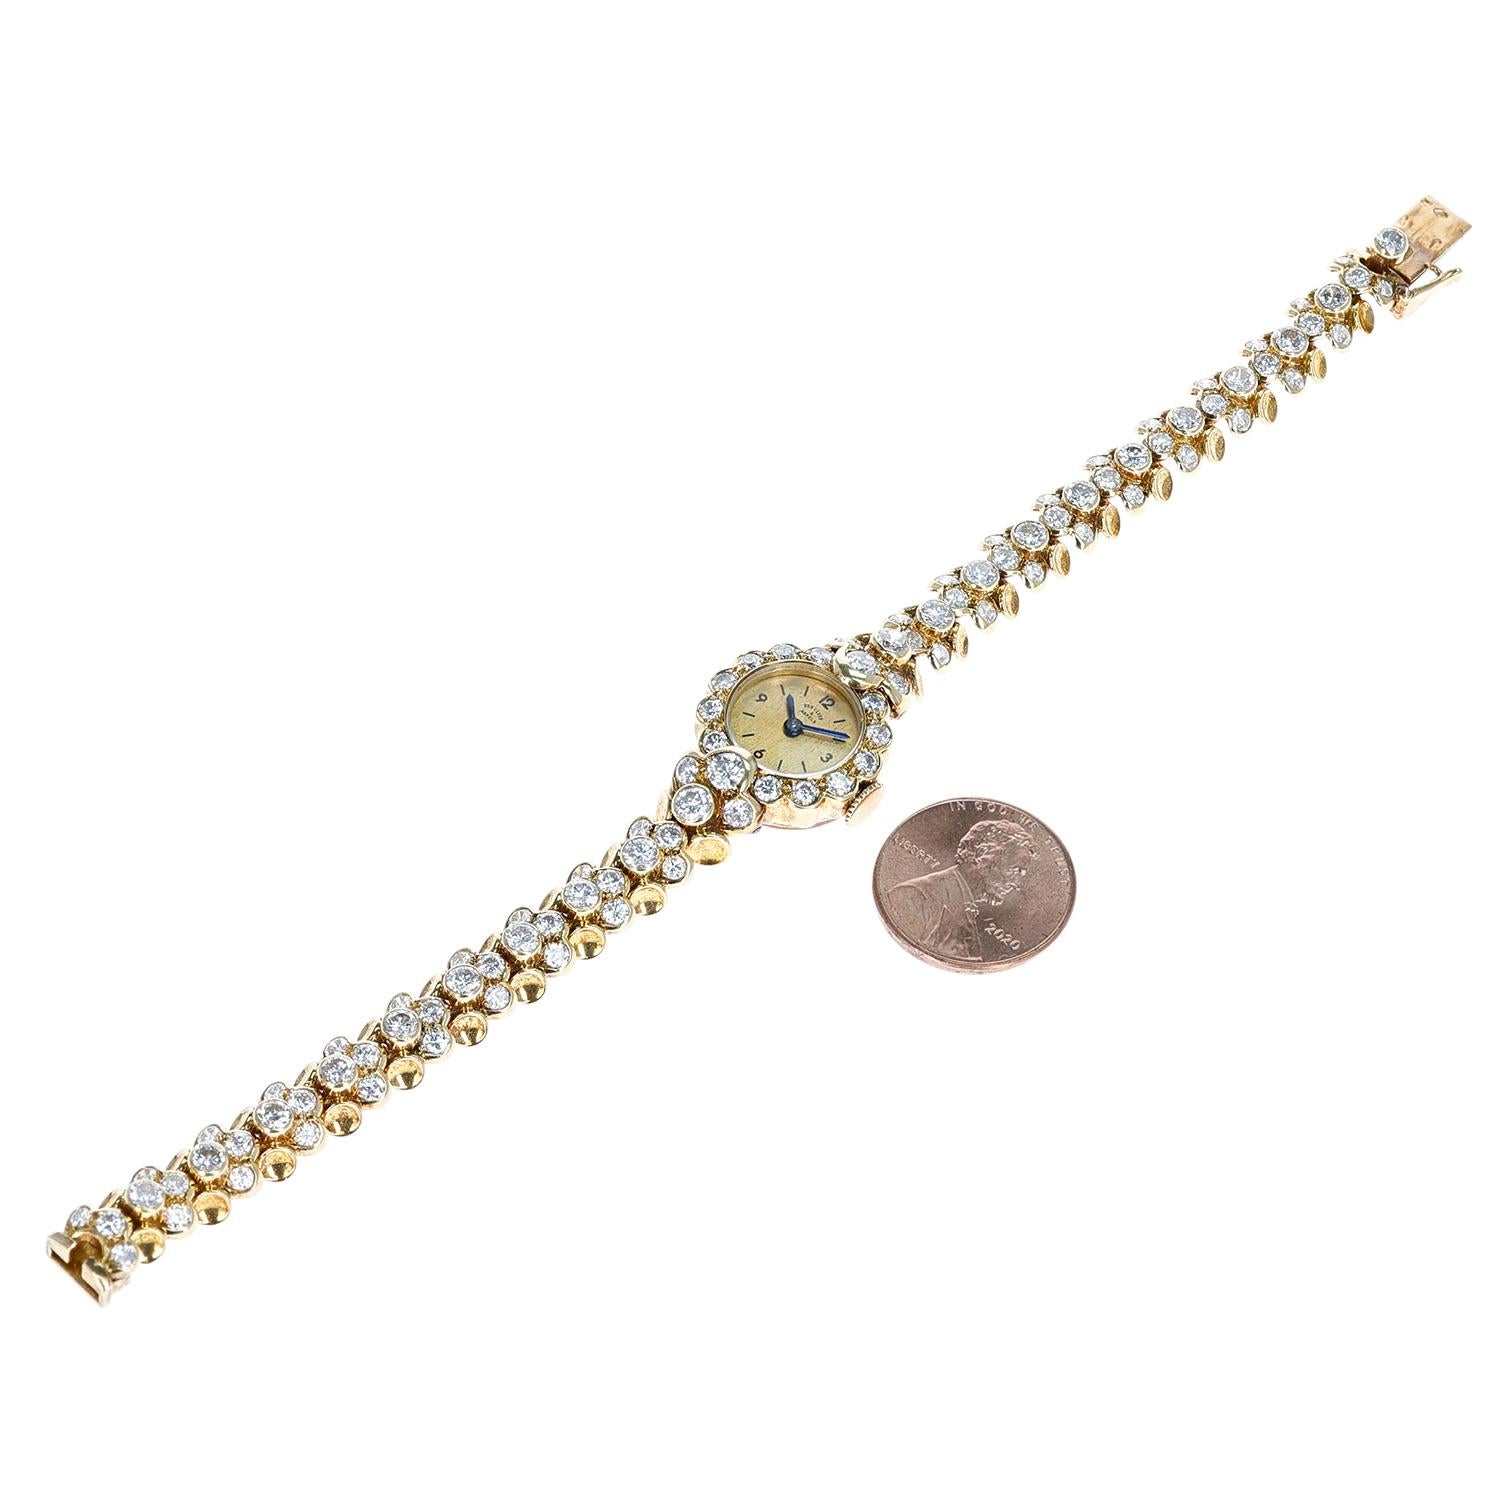 An exquisite Van Cleef & Arpels Diamond Watch Bracelet. The total weight of the watch is 33.62 grams. The length is 6.50 inches. 